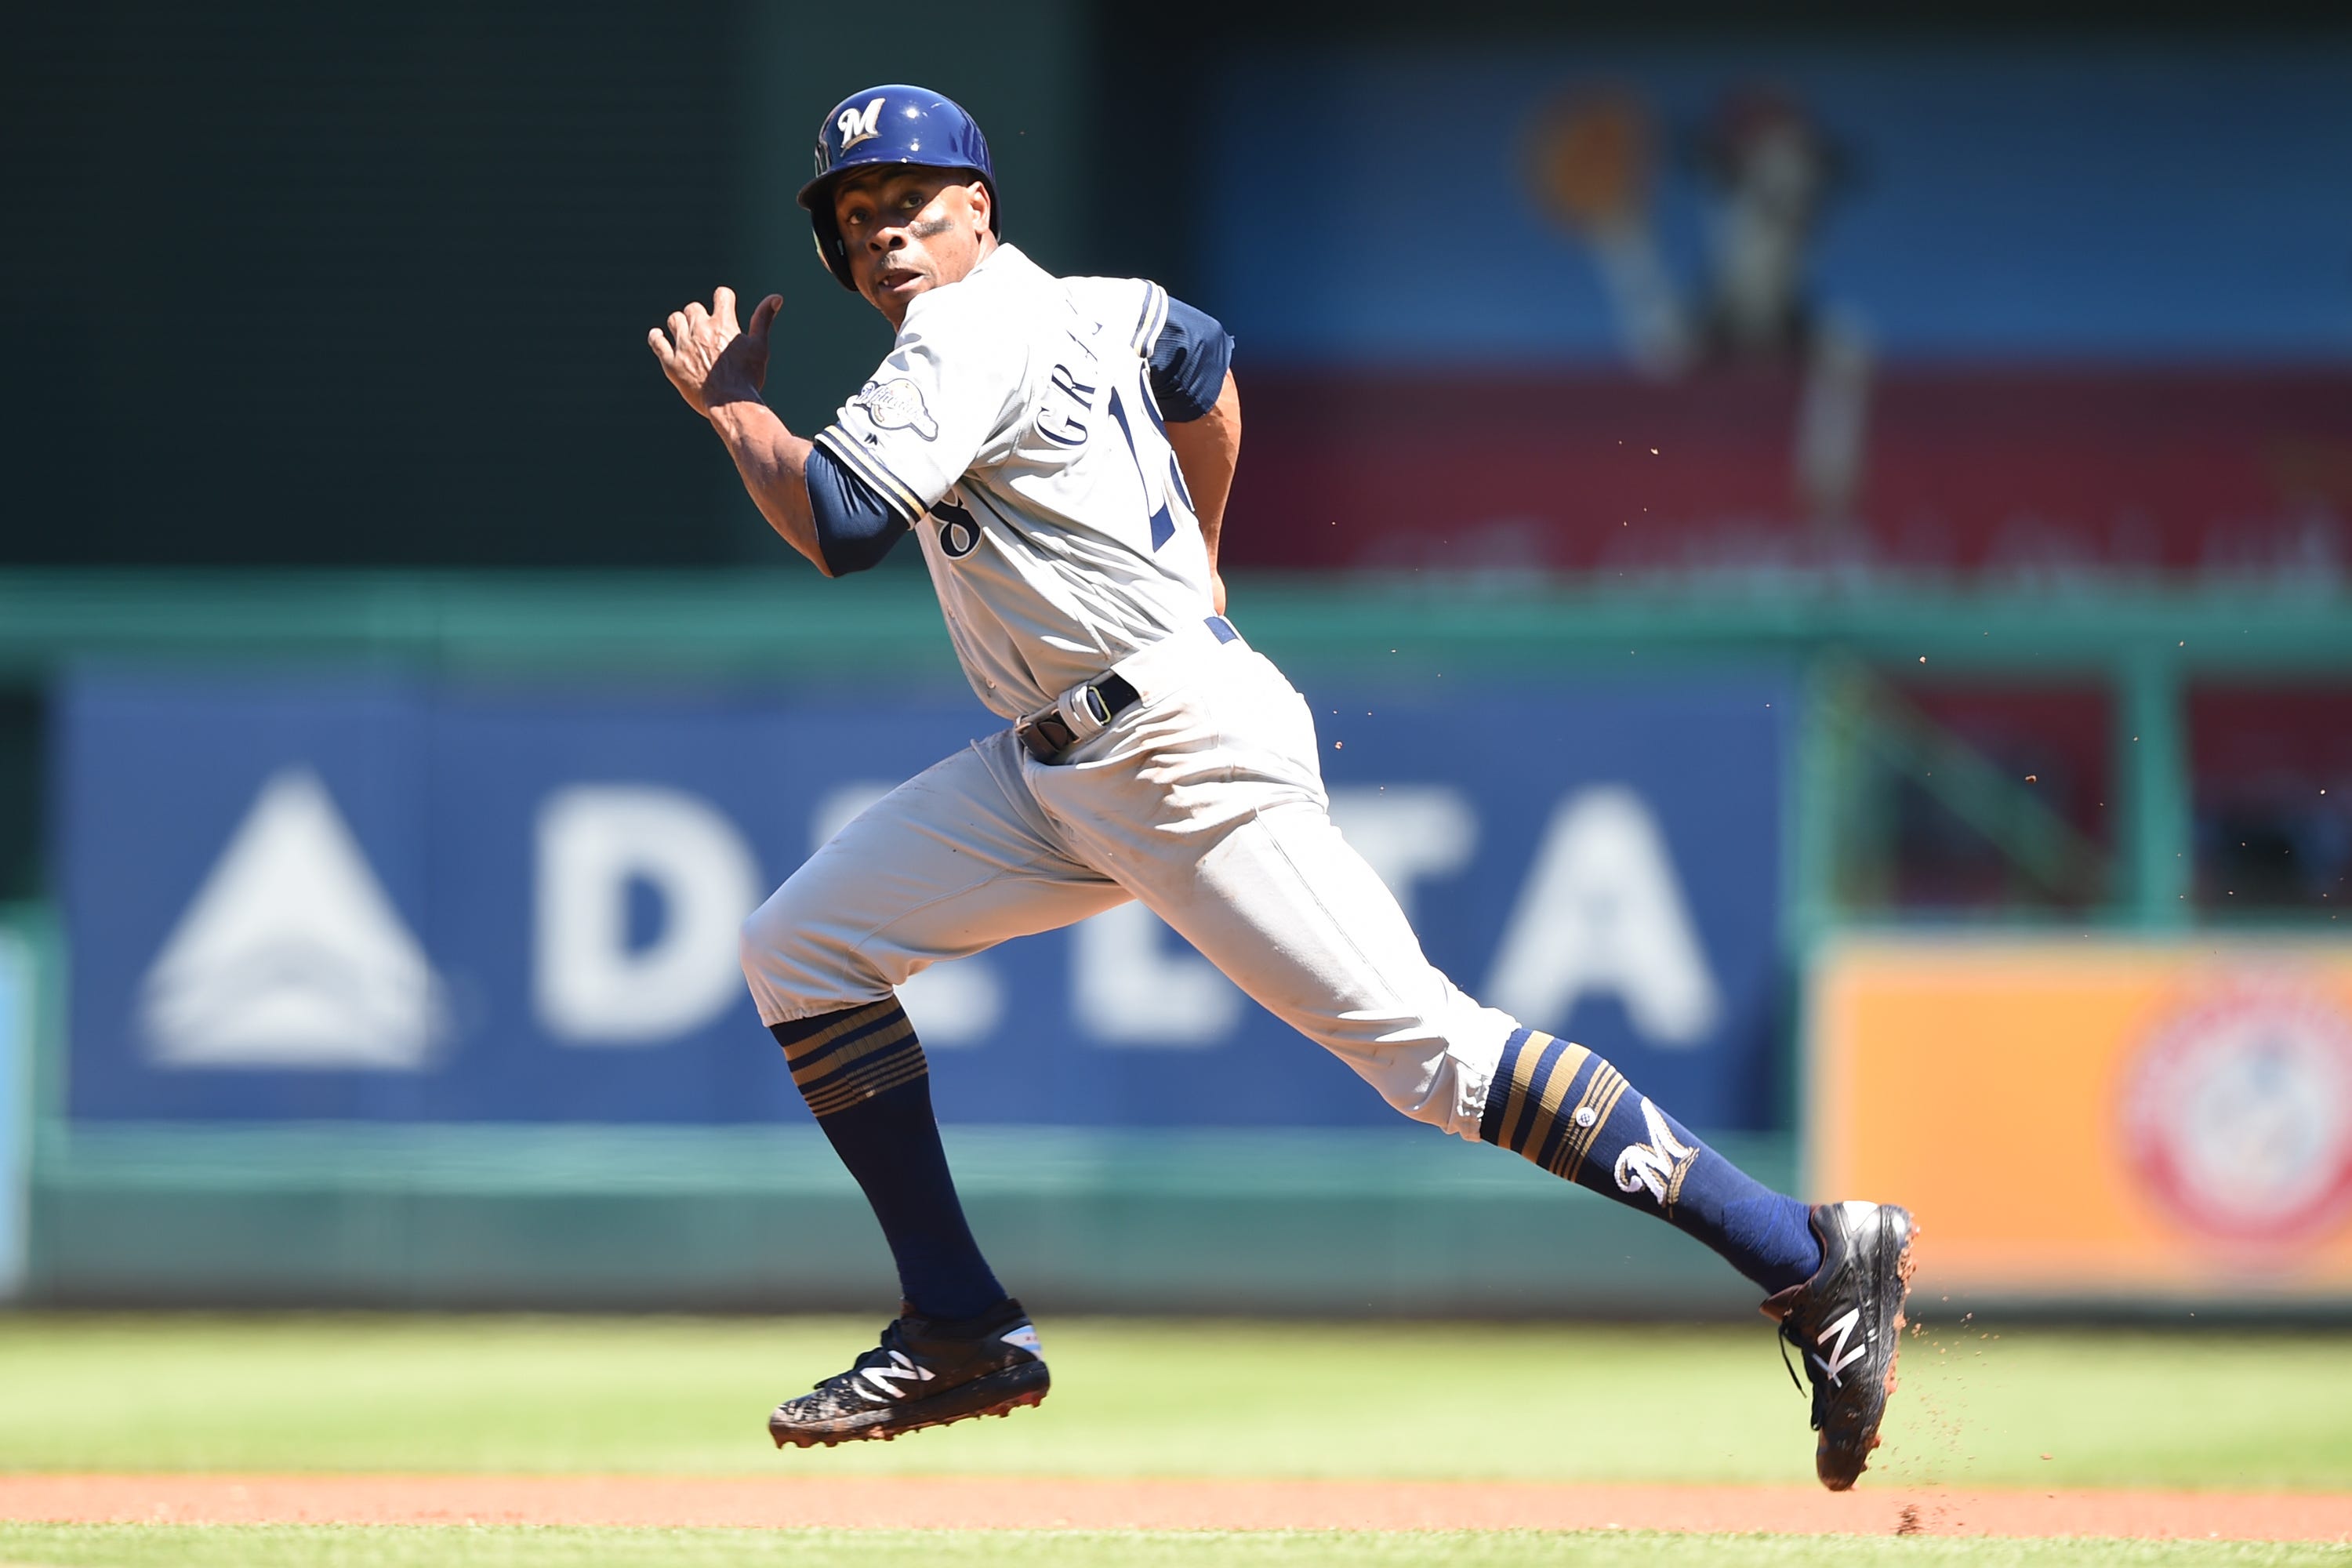 Brewers outfielders Curtis Granderson